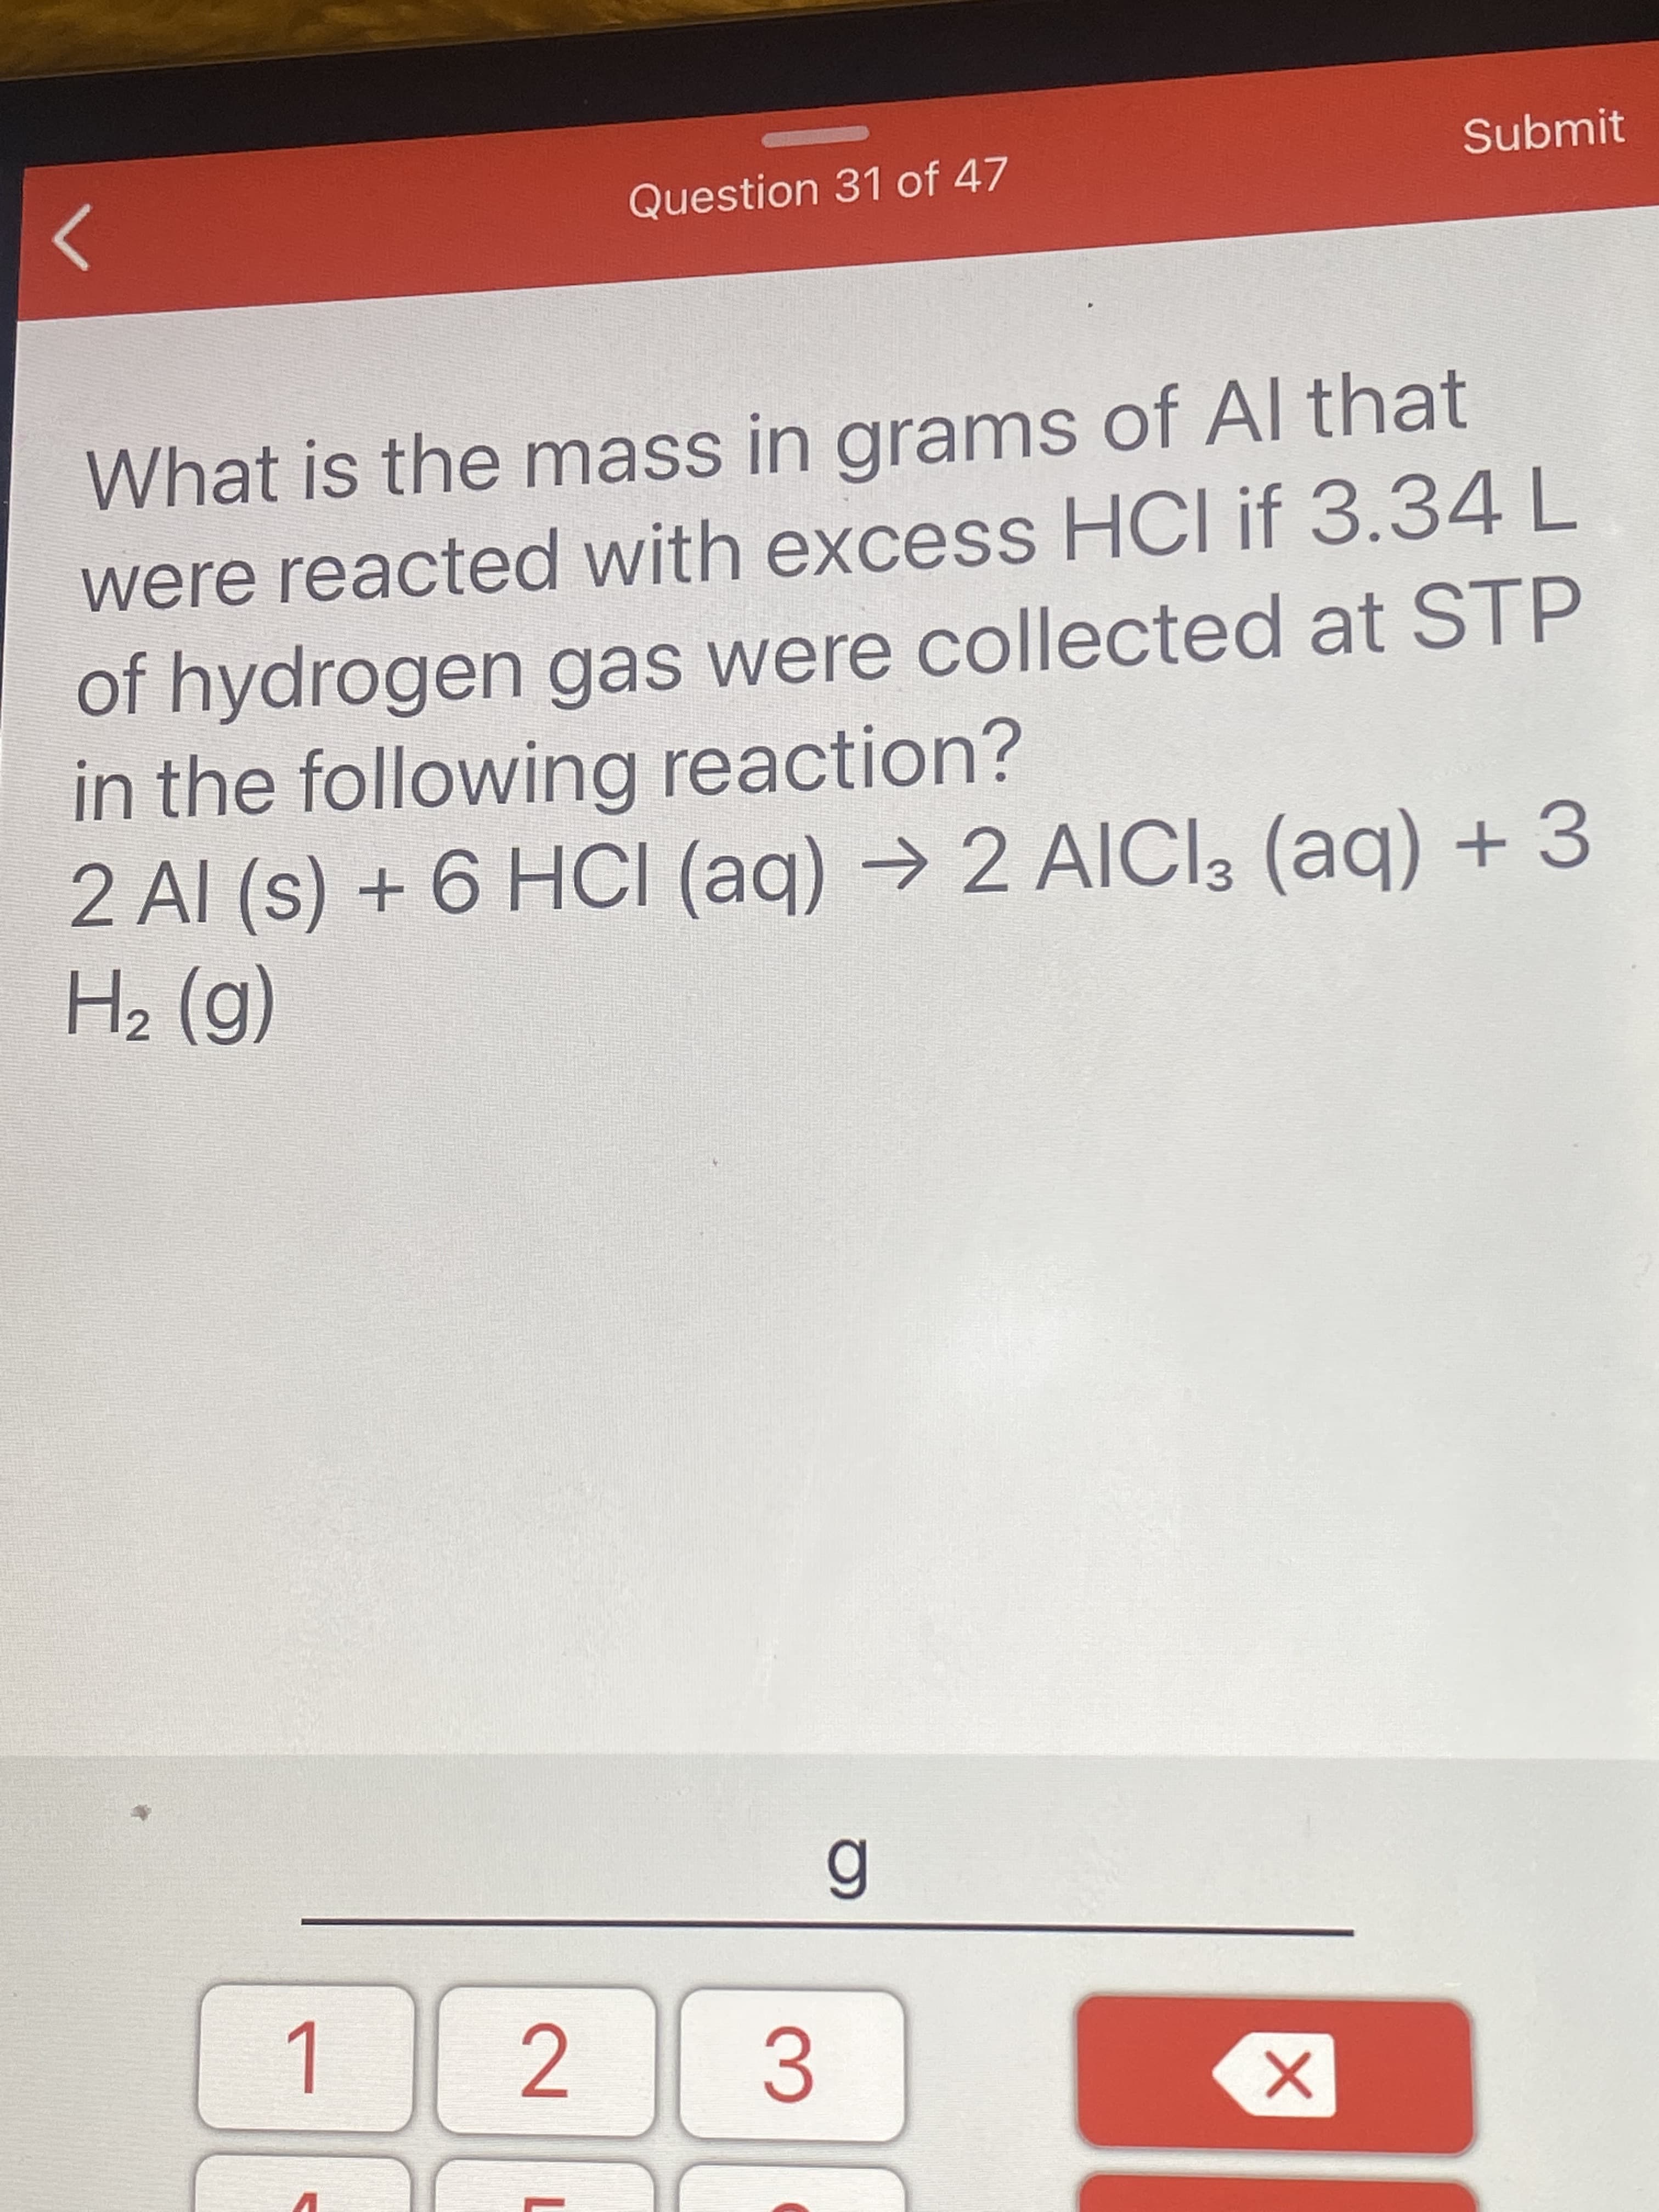 What is the mass in grams of Al that
were reacted with excess HCI if 3.34L
of hydrogen gas were collected at STP
in the following reaction?
2 Al (s) + 6 HCI (aq)
H2 (g)
→ 2 AIICI3 (aq) + 3
